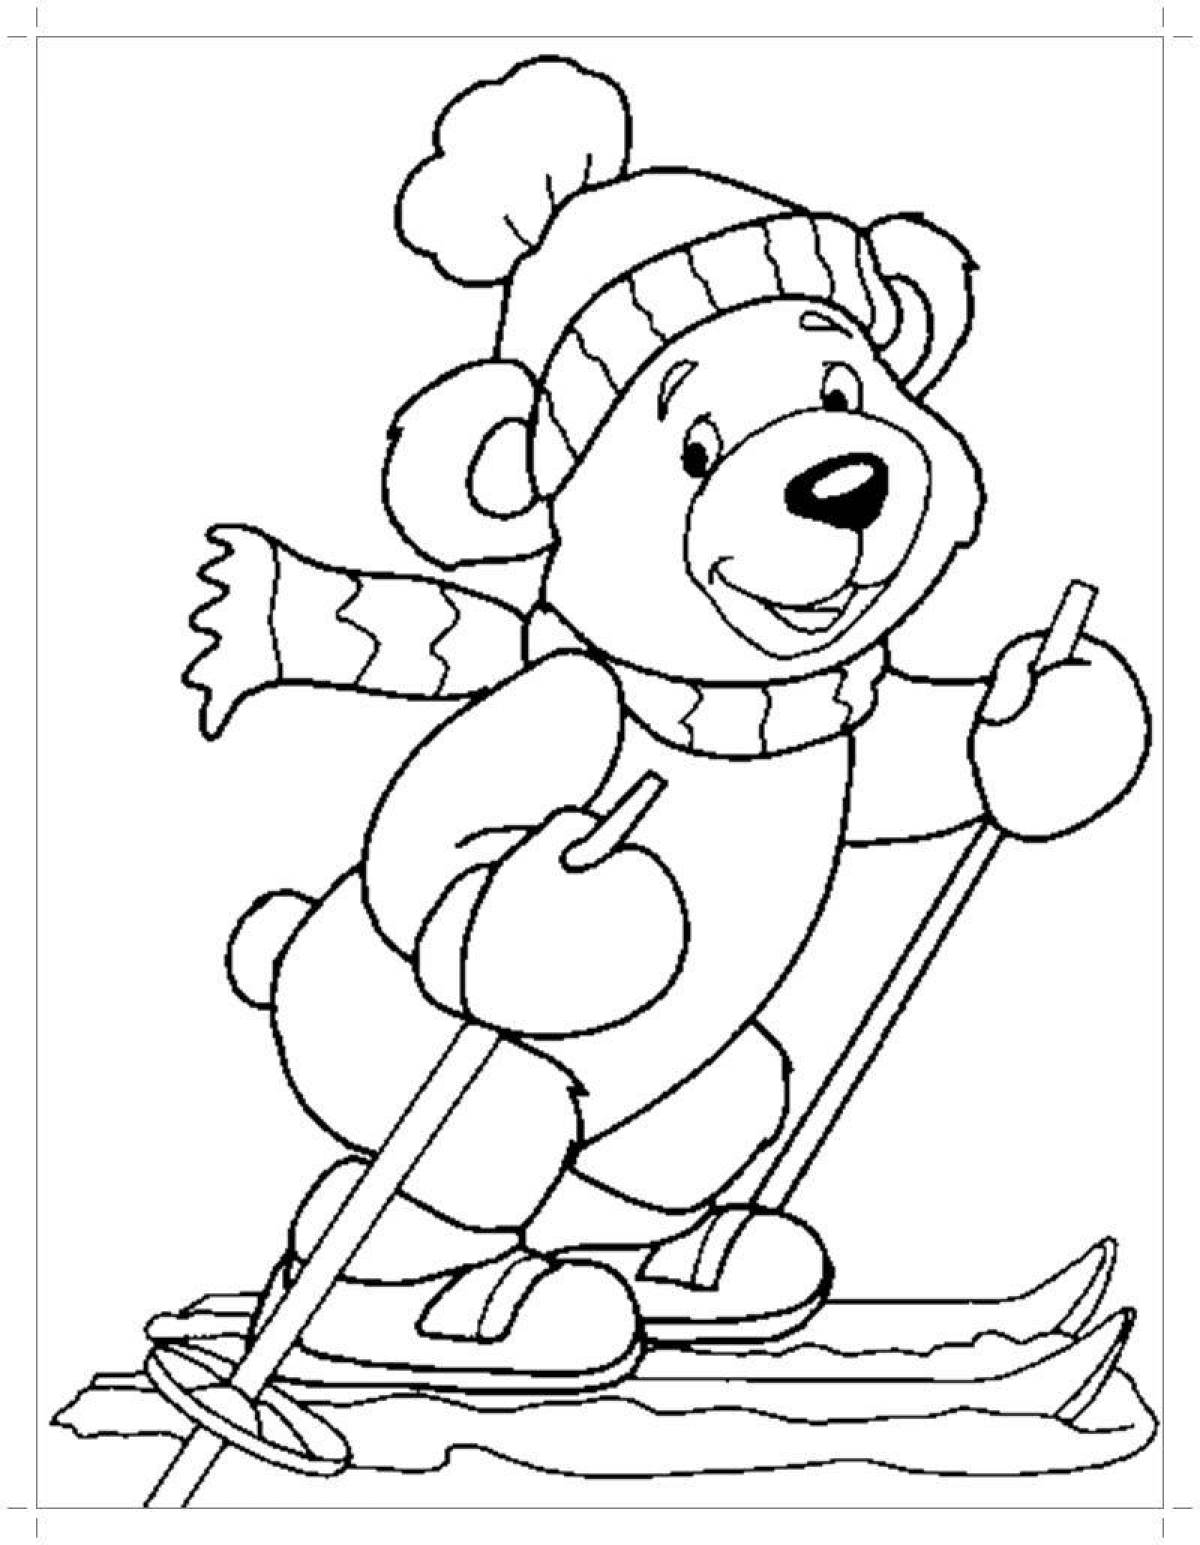 Fabulous winter coloring book for 3 year olds